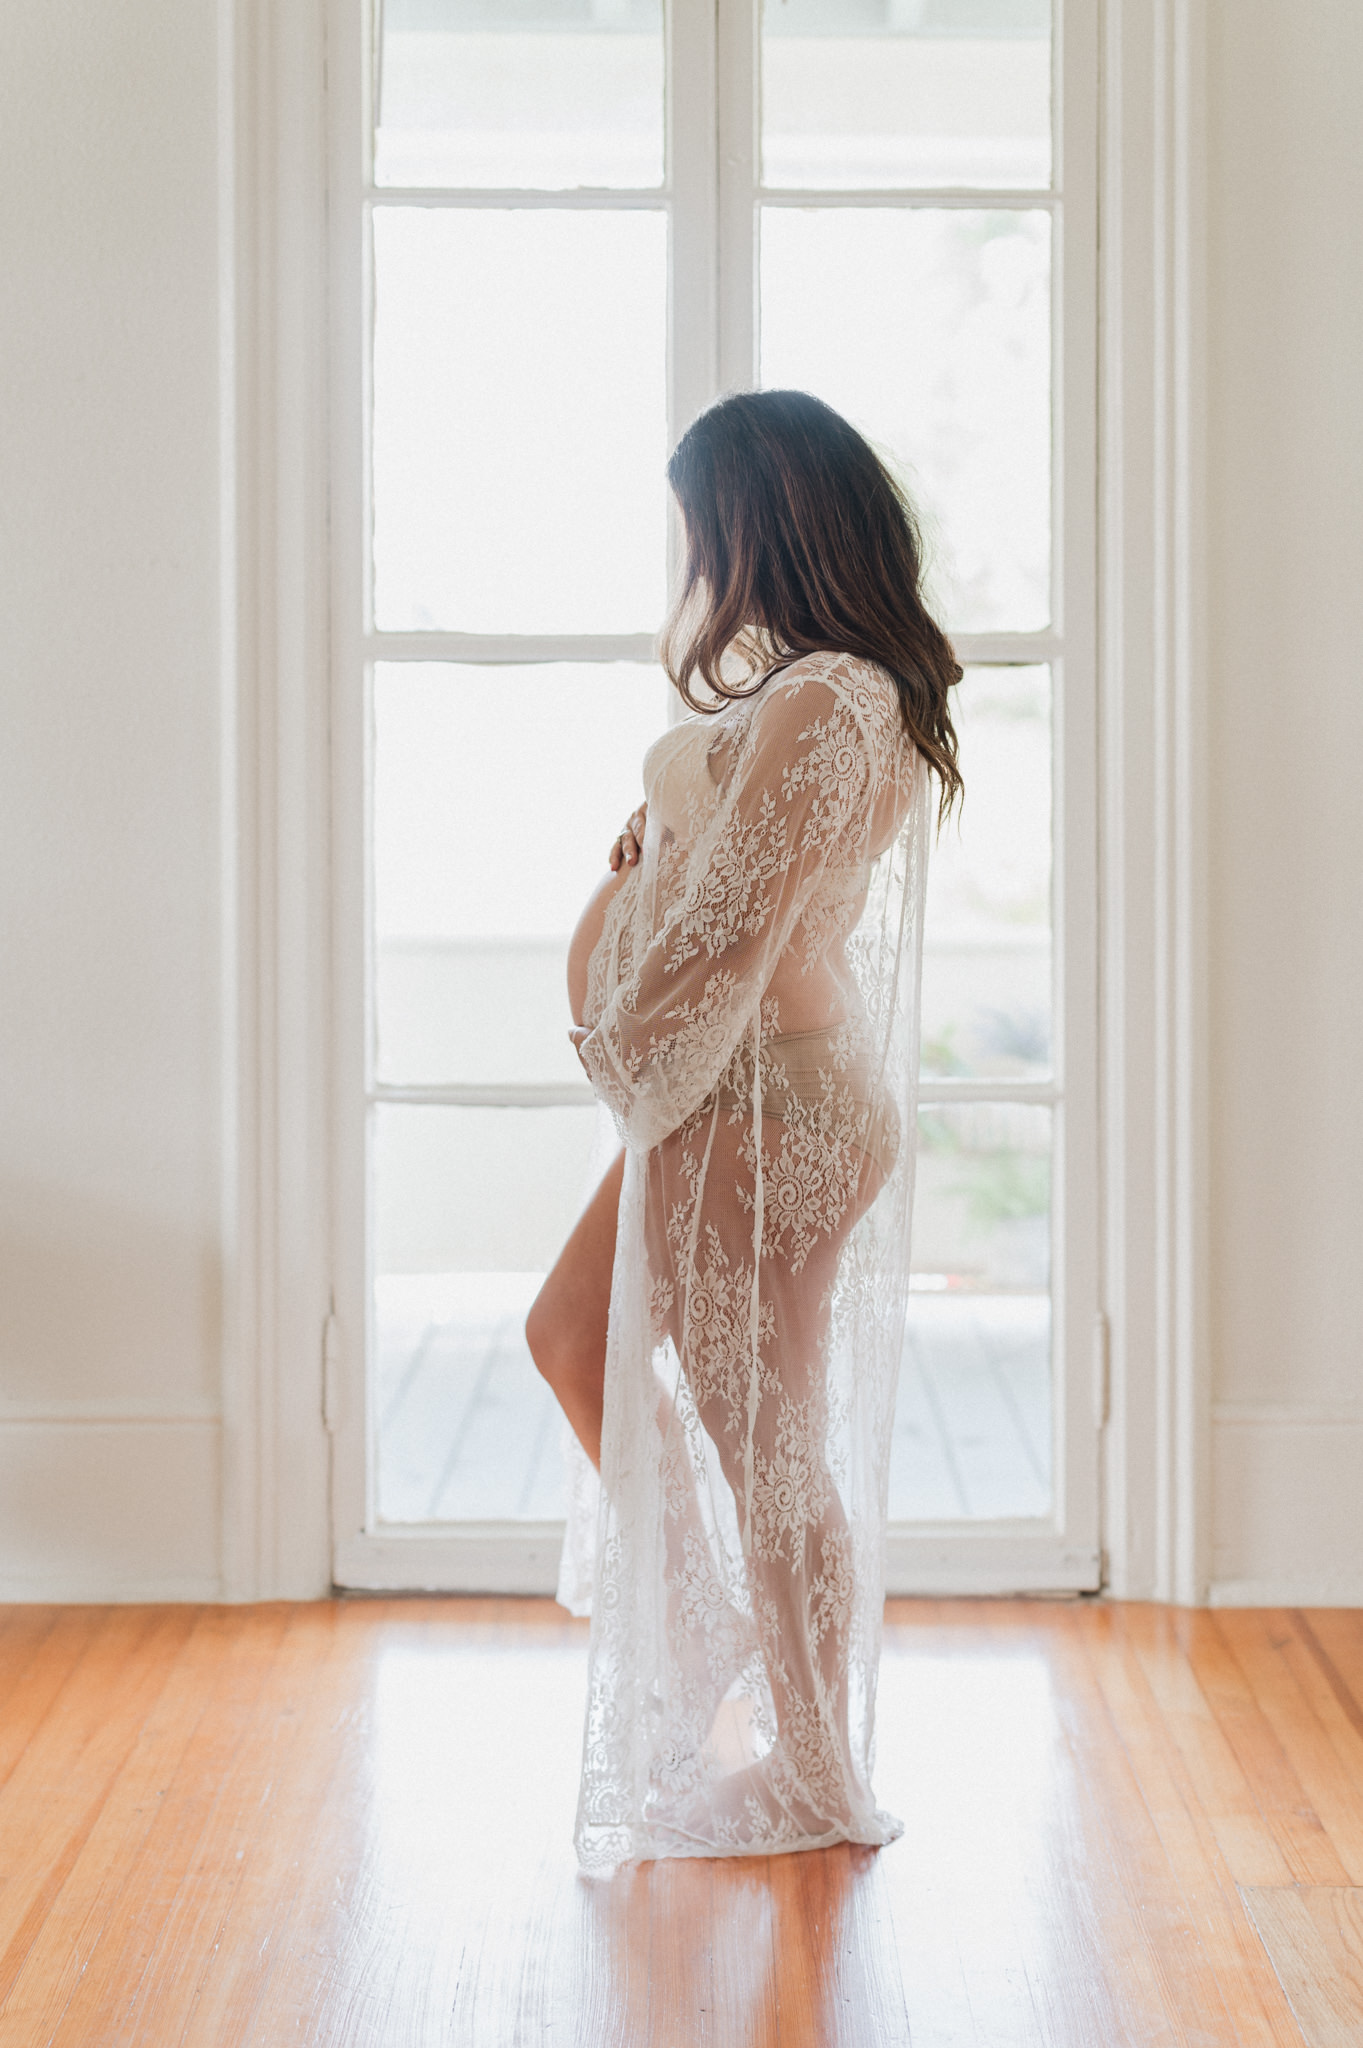 A mother-to-be in a lace maternity gown stands in front of a window looking down at her bump acacia obgyn